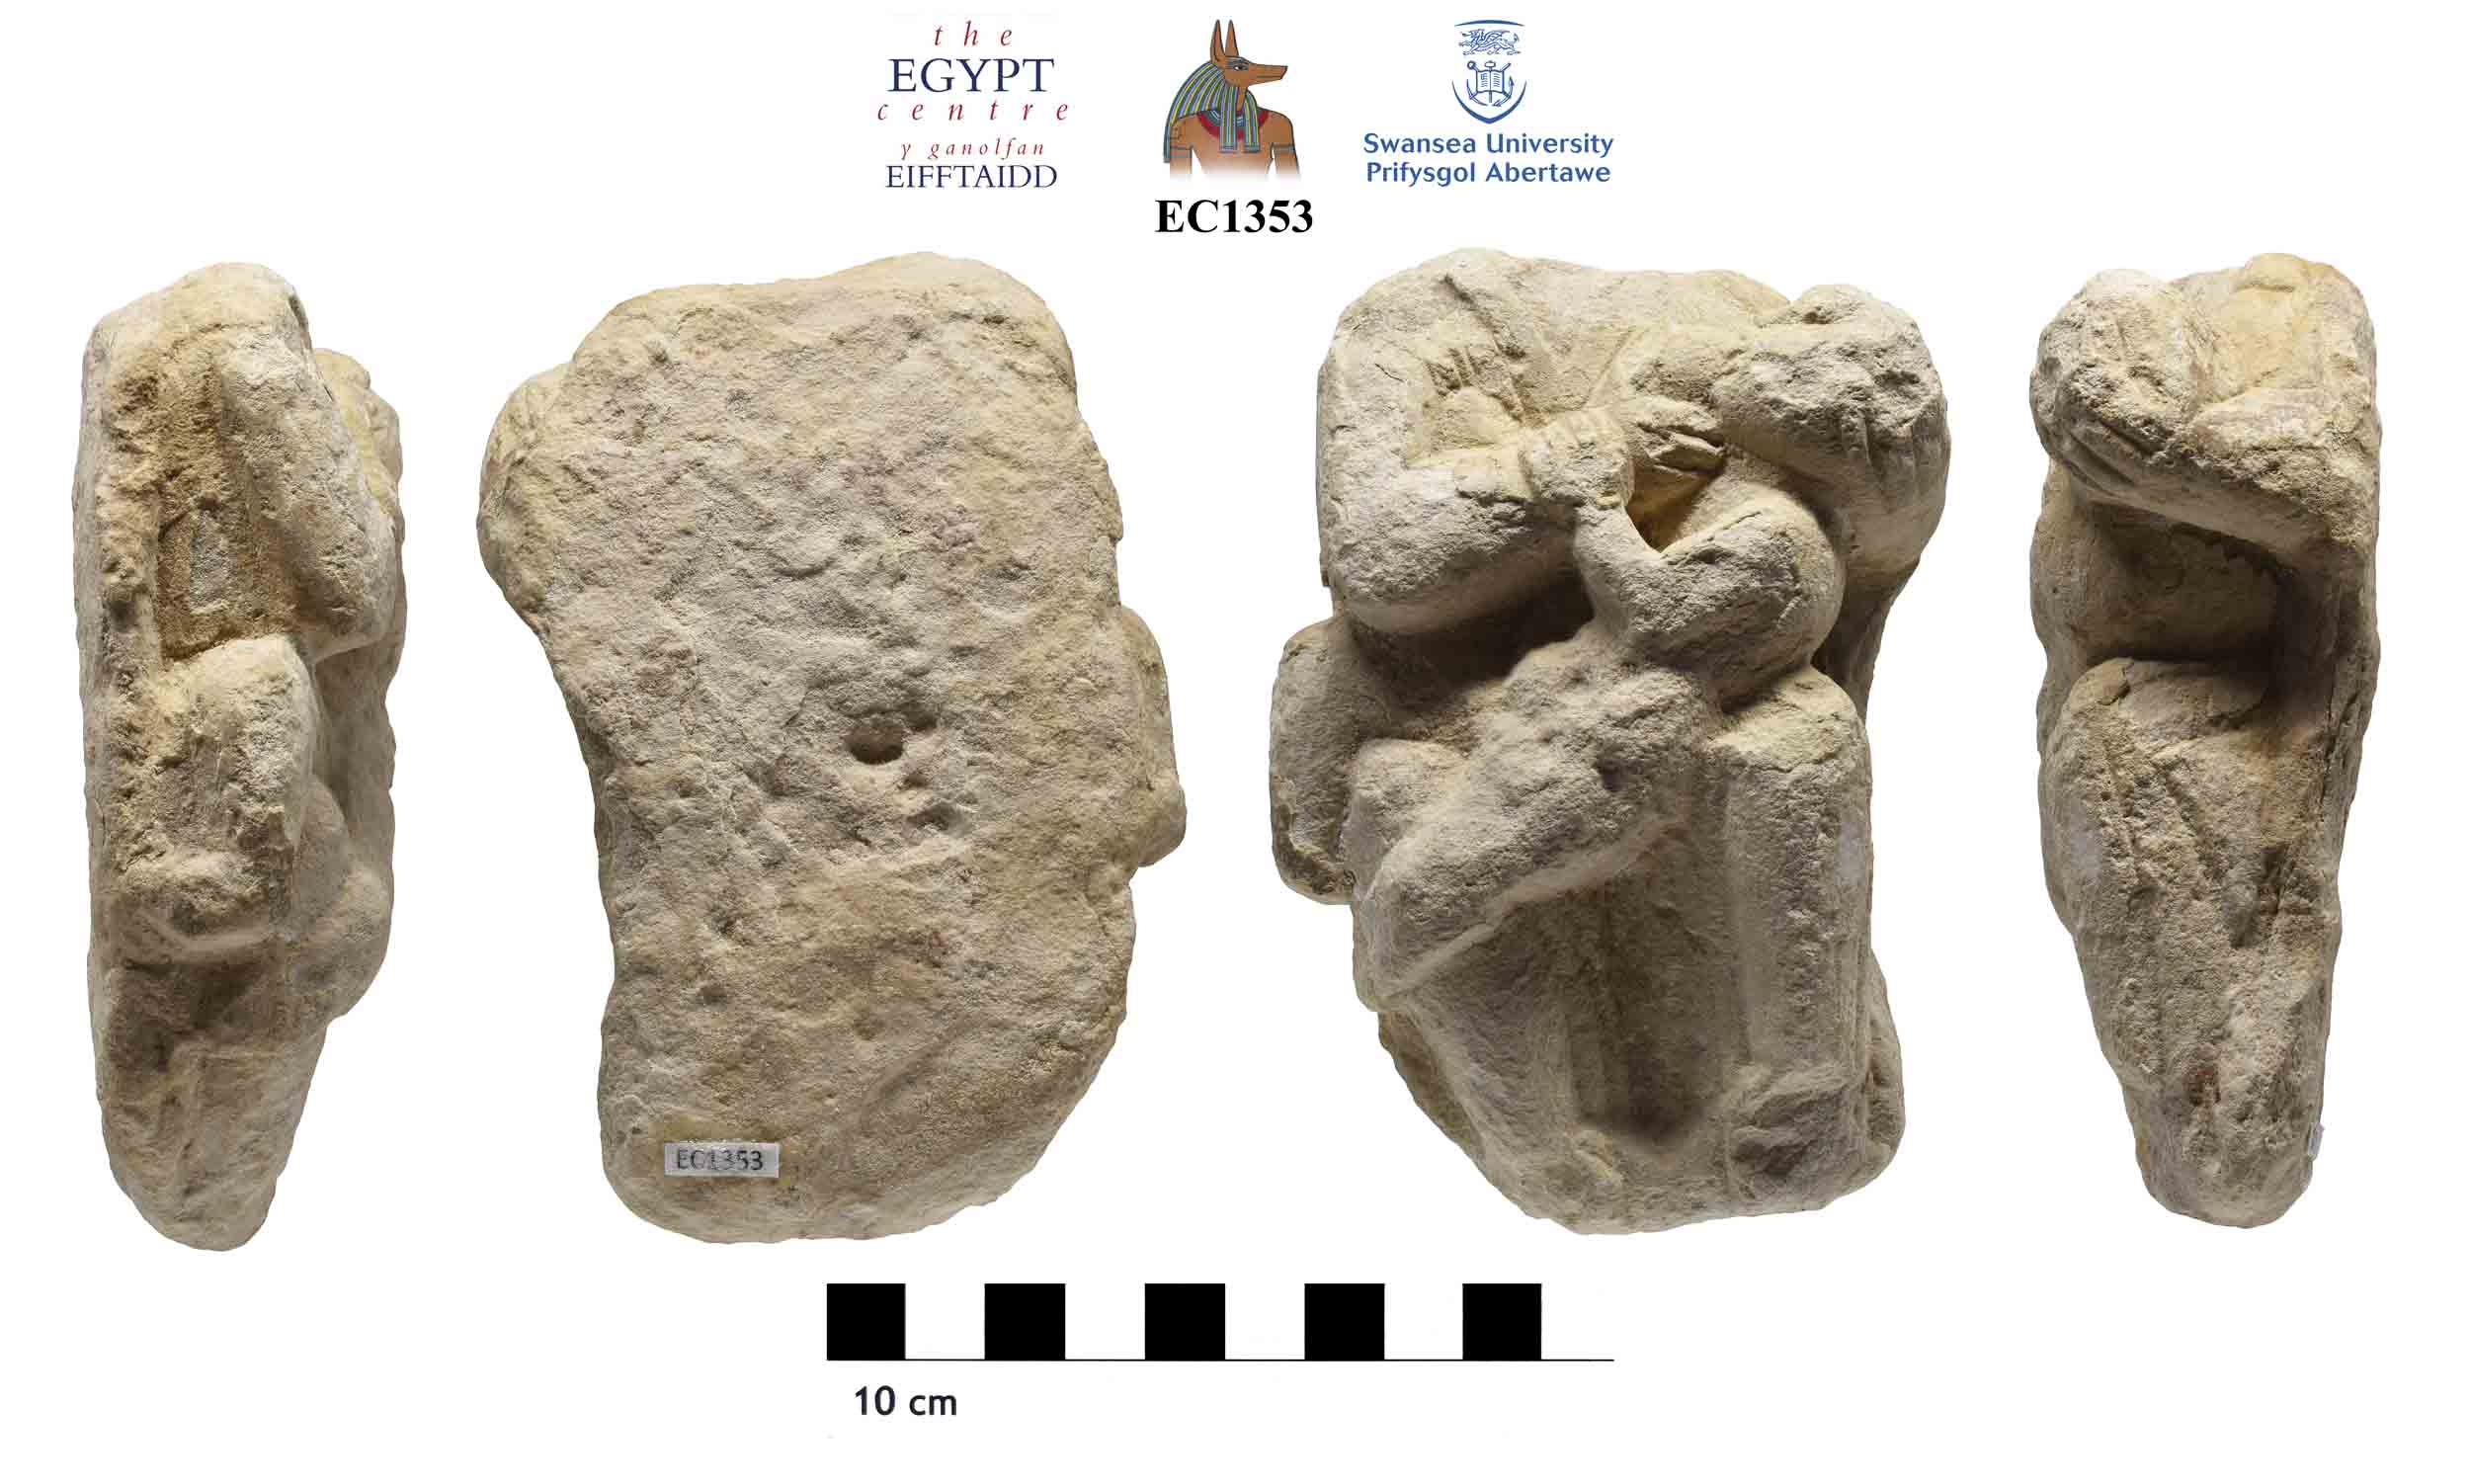 Image for: Fragment of a limestone statue